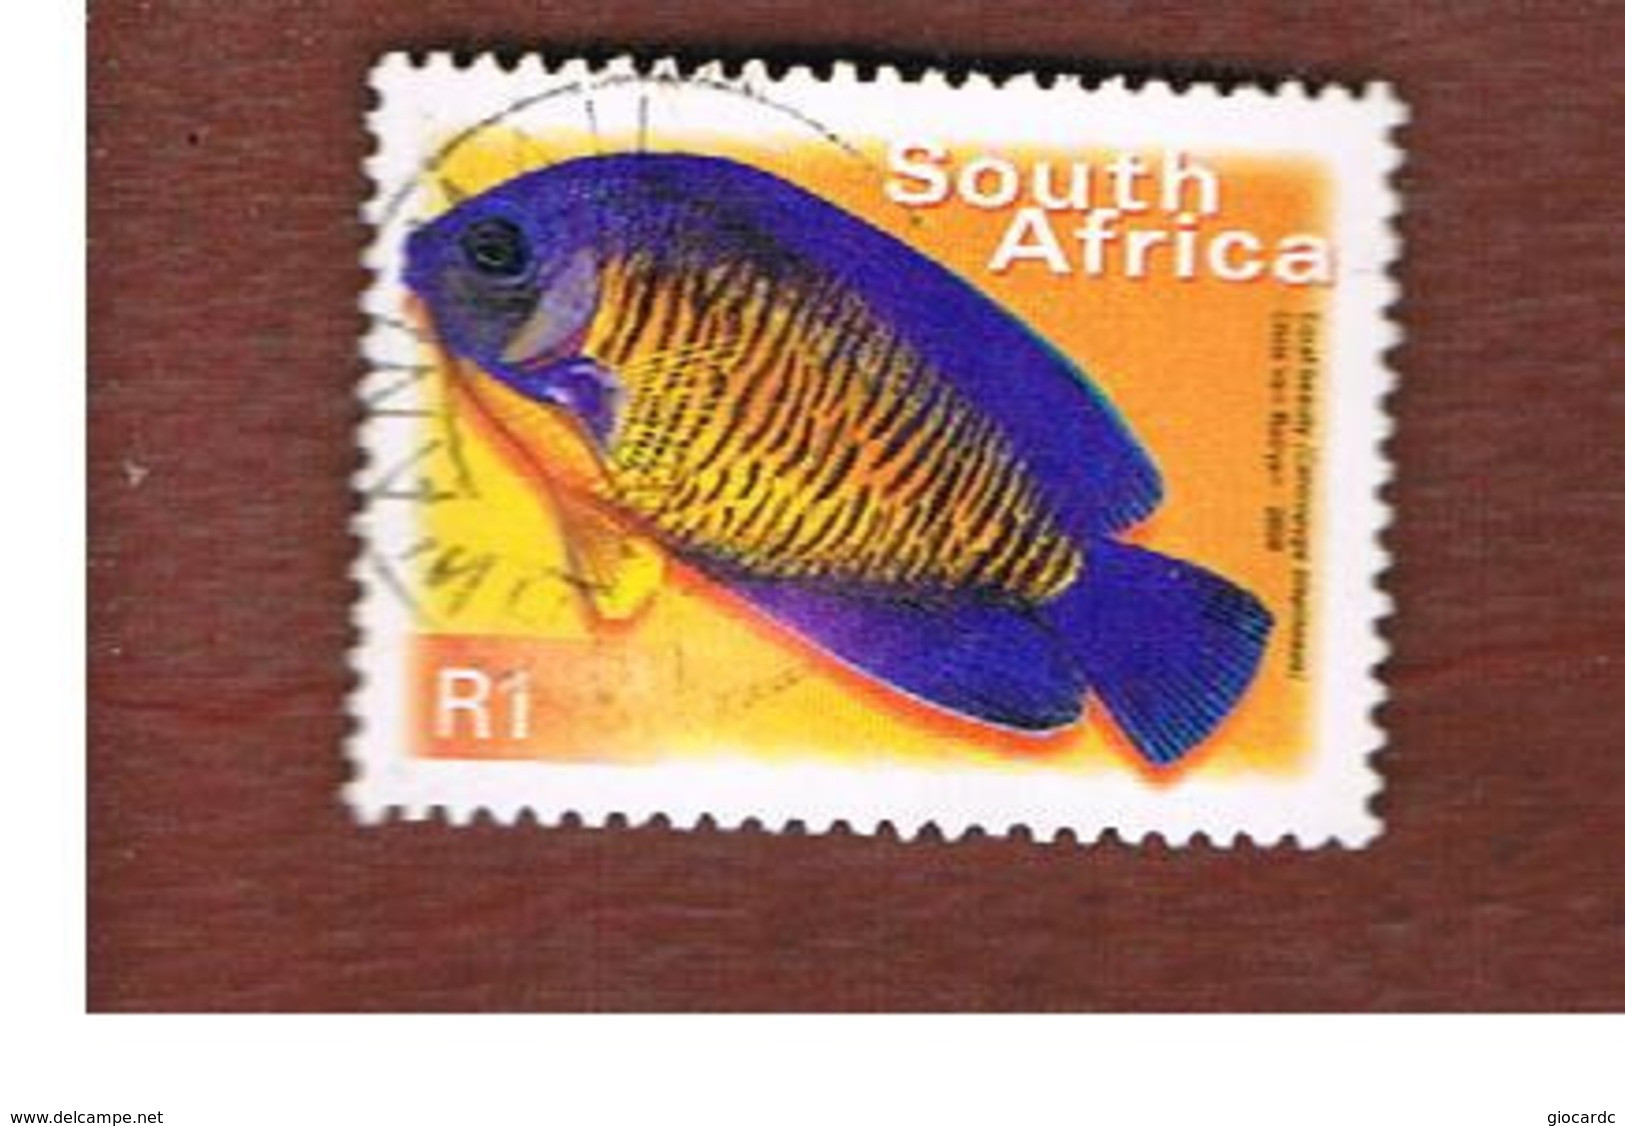 SUD AFRICA (SOUTH AFRICA) - SG 1215   -   2000 FISHES: CORAL BEAUTY  - USED - Used Stamps